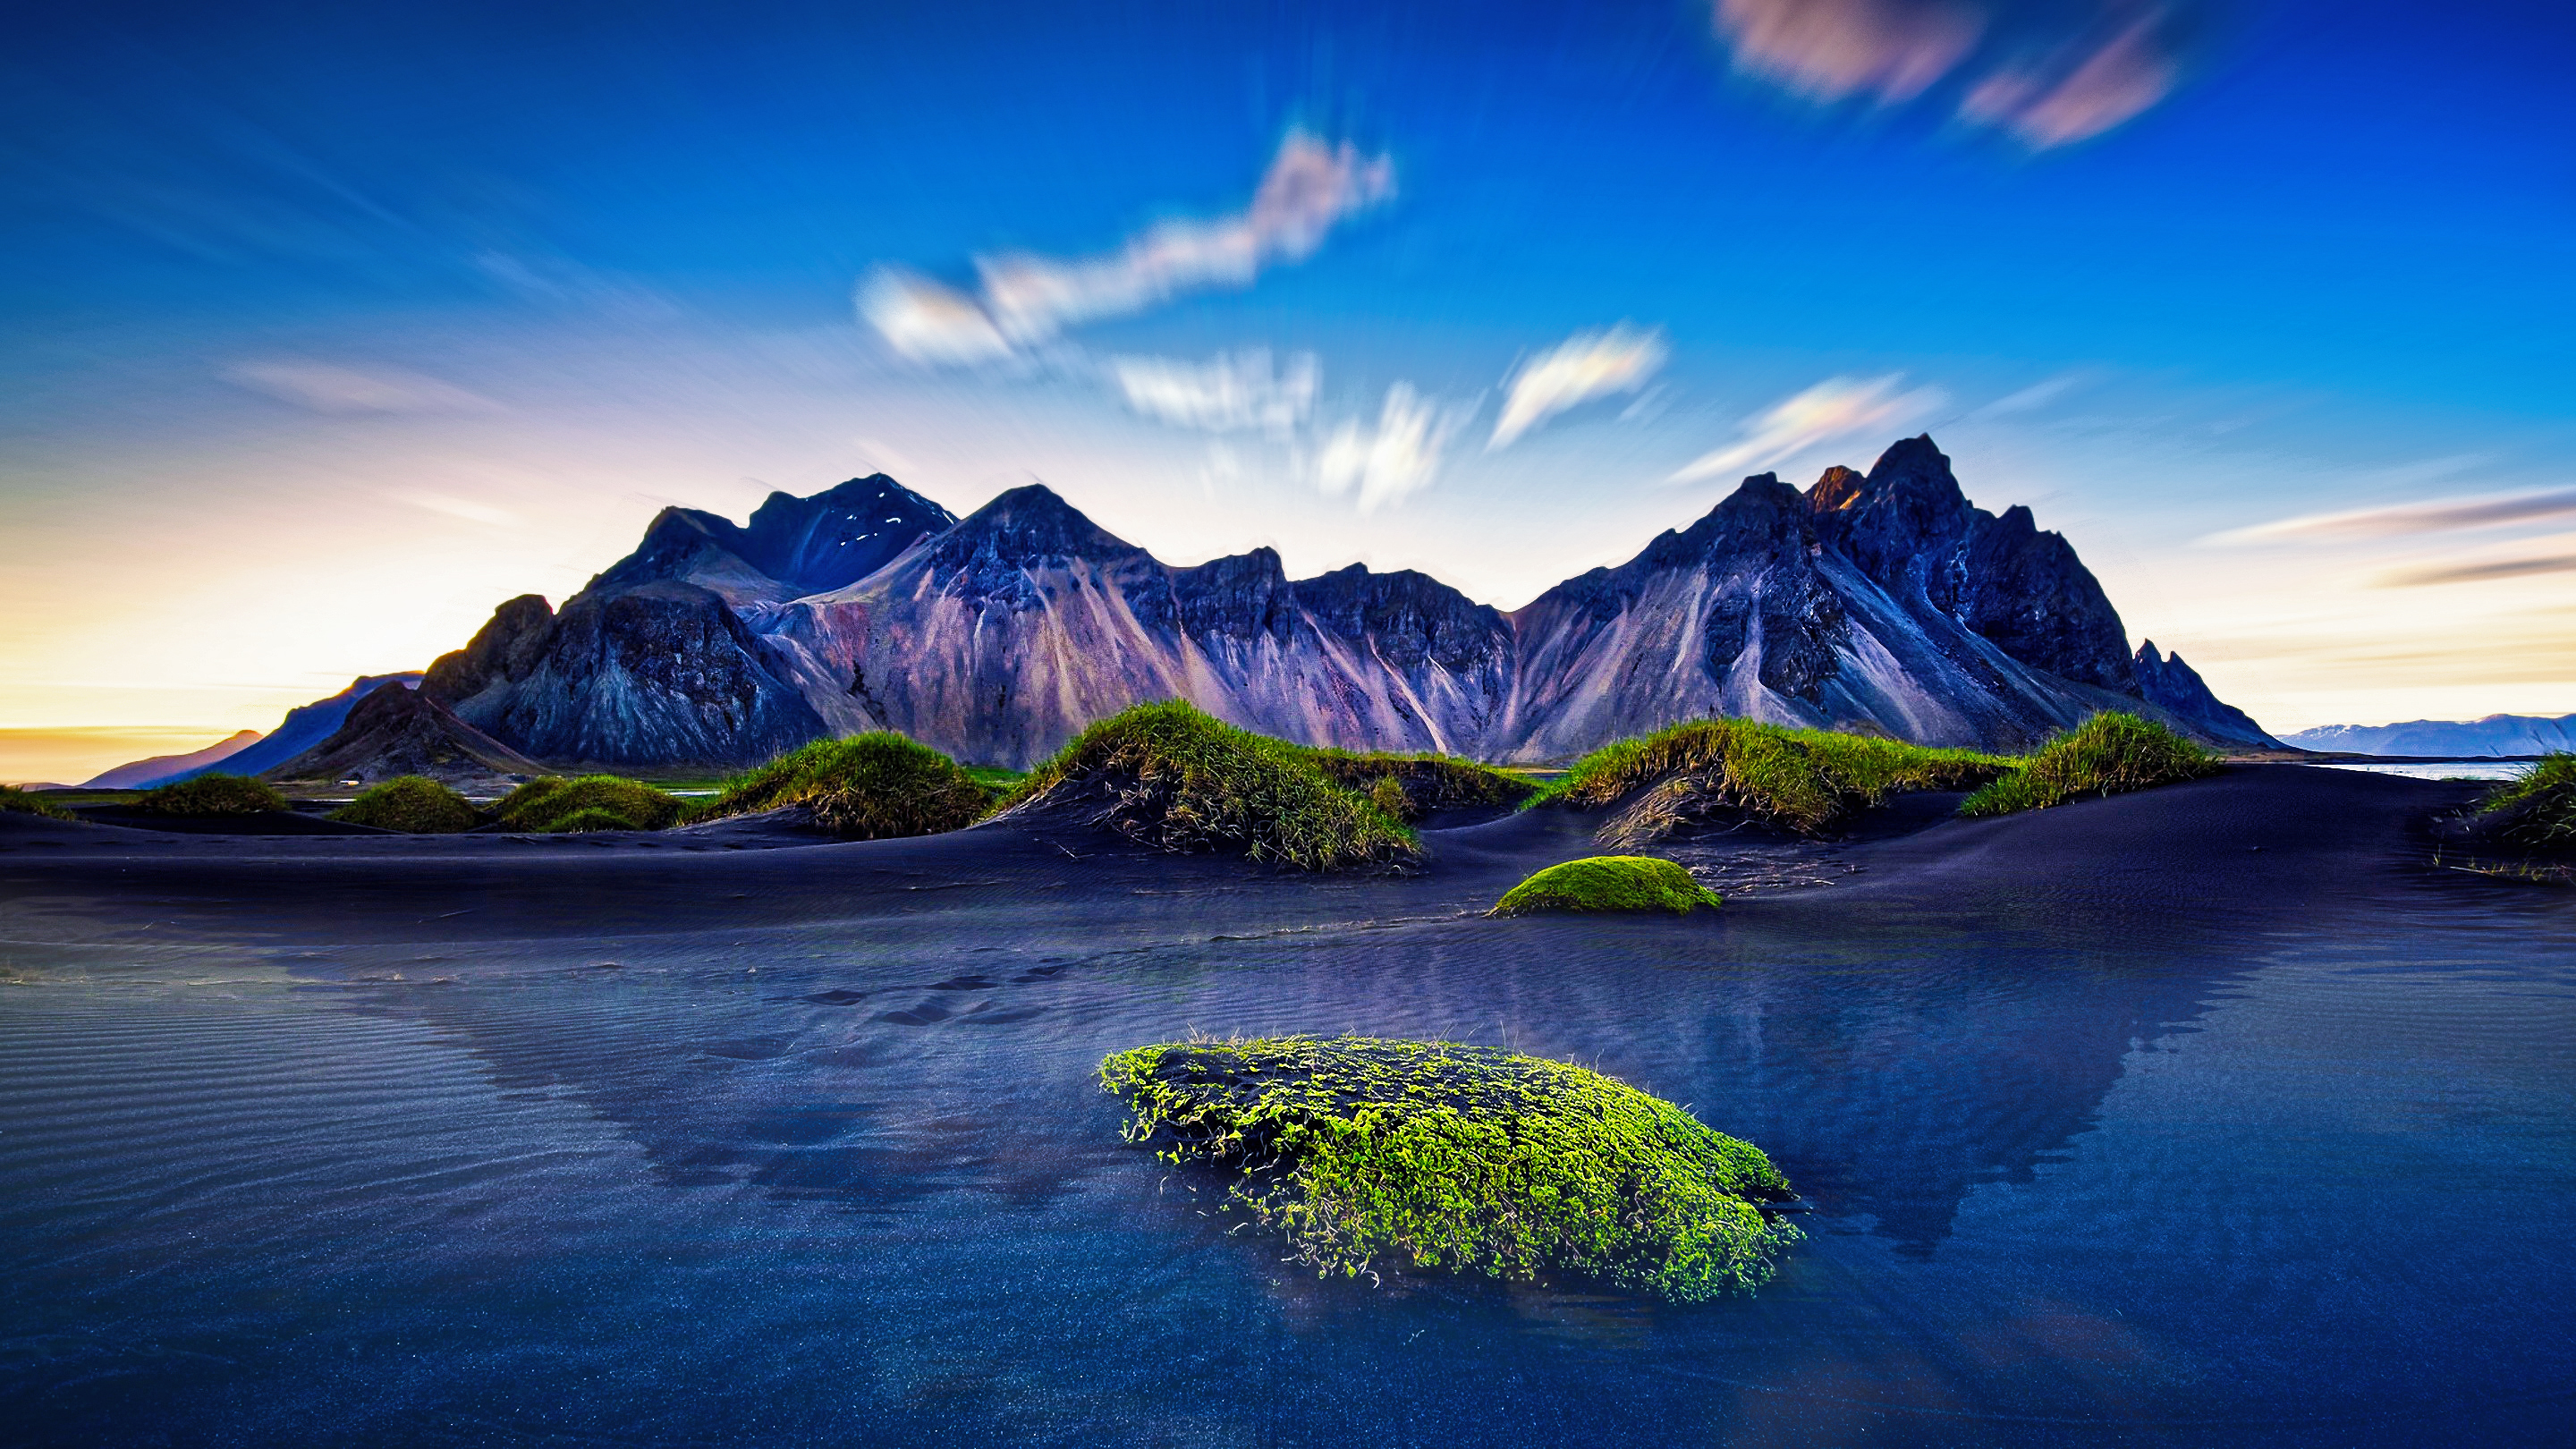 Landscape Mountains Nature Blue HDR Iceland Beach 2880x1620